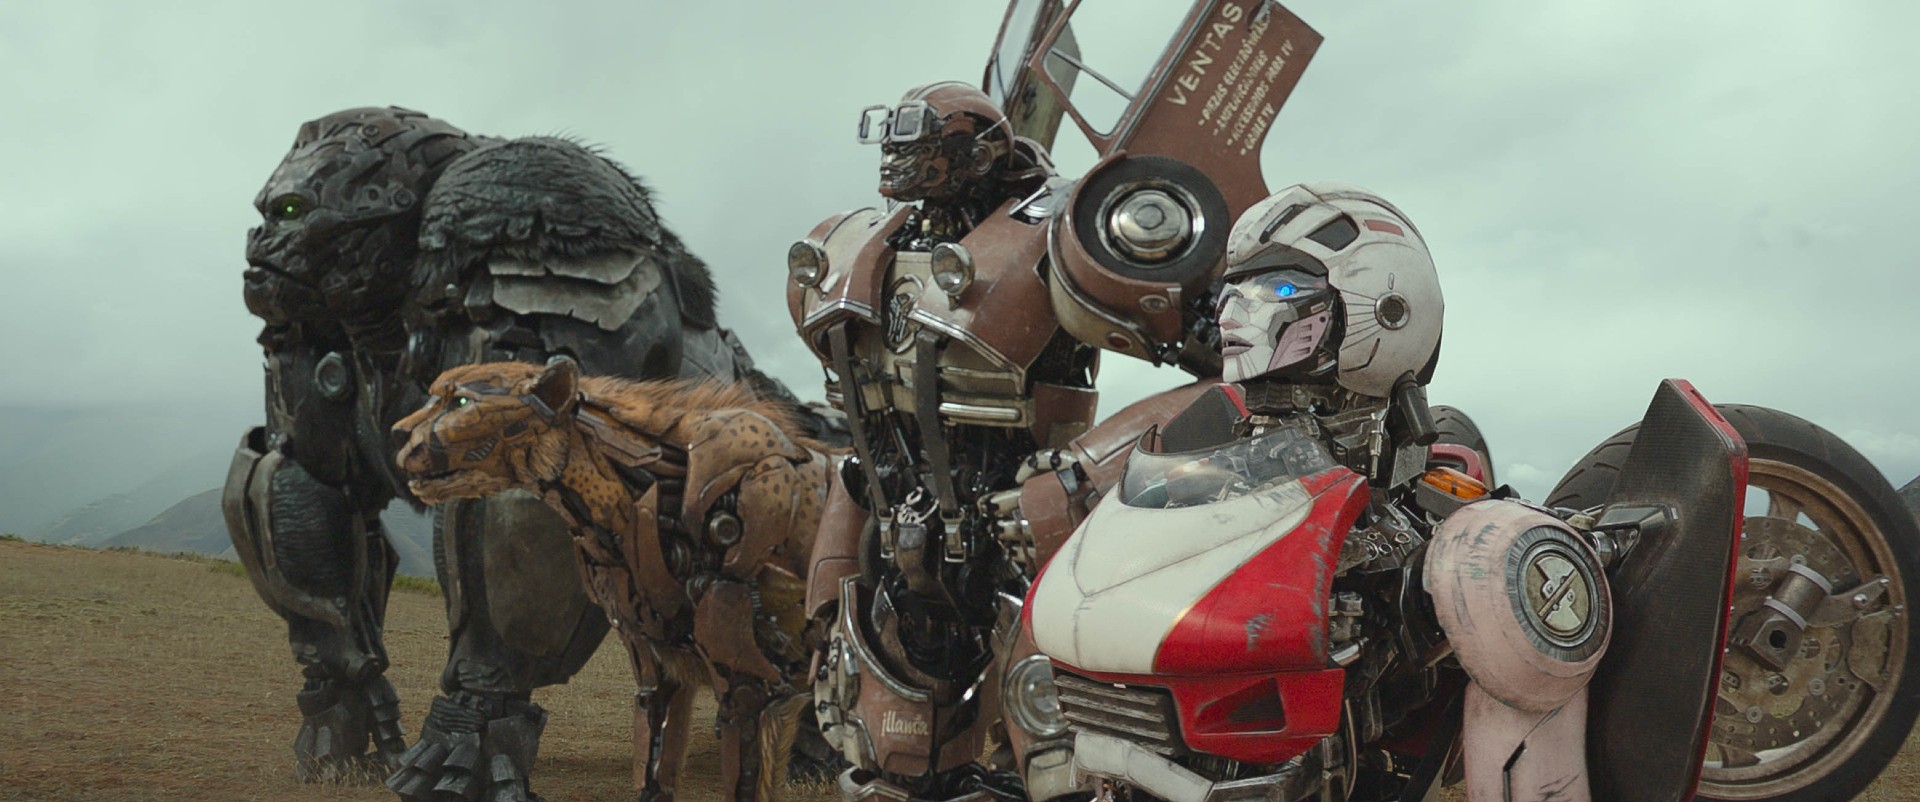 Transformers Rise of the Beasts review Needs more Bayhem Digital Trends